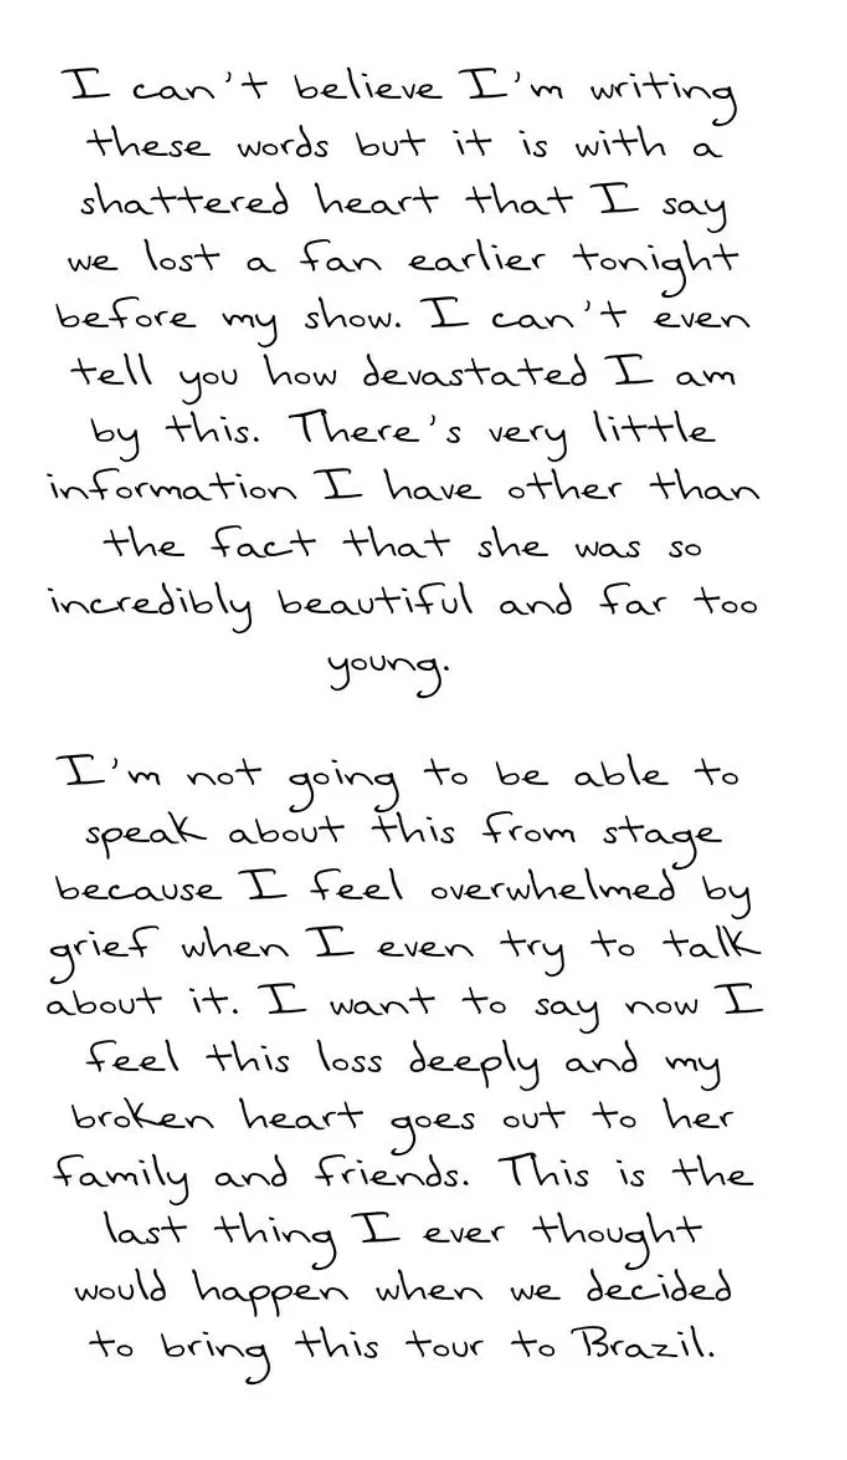 With this handwritten message, Swift shared her pain over the loss of her fan